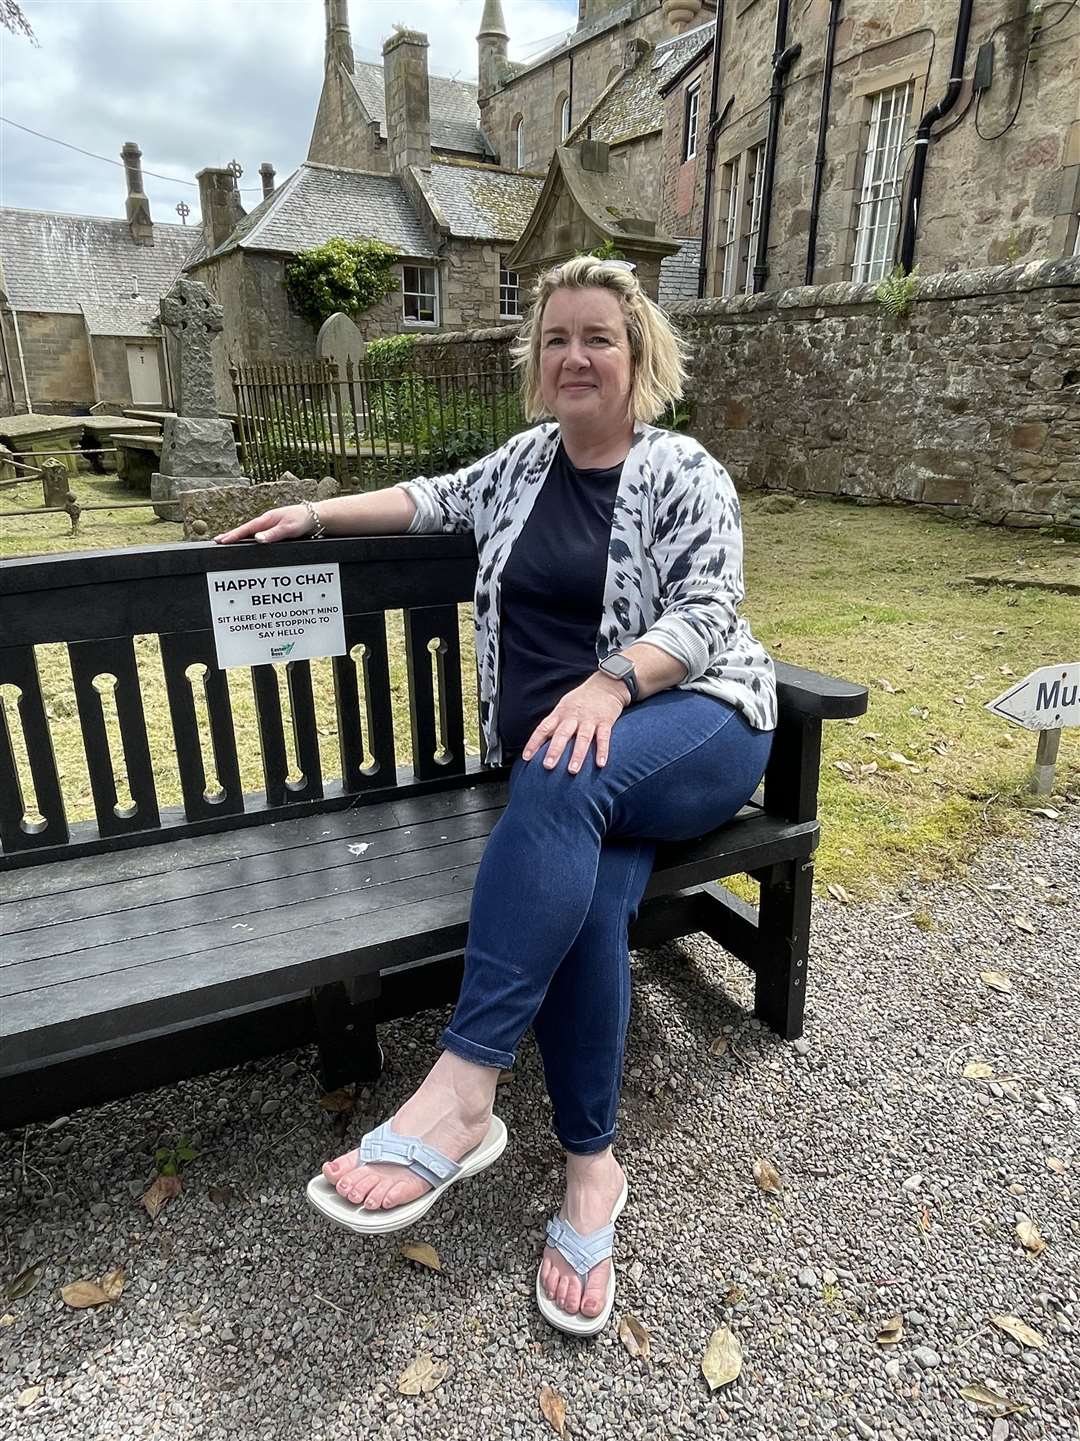 Rachel Cunningham at the bench in Tain.